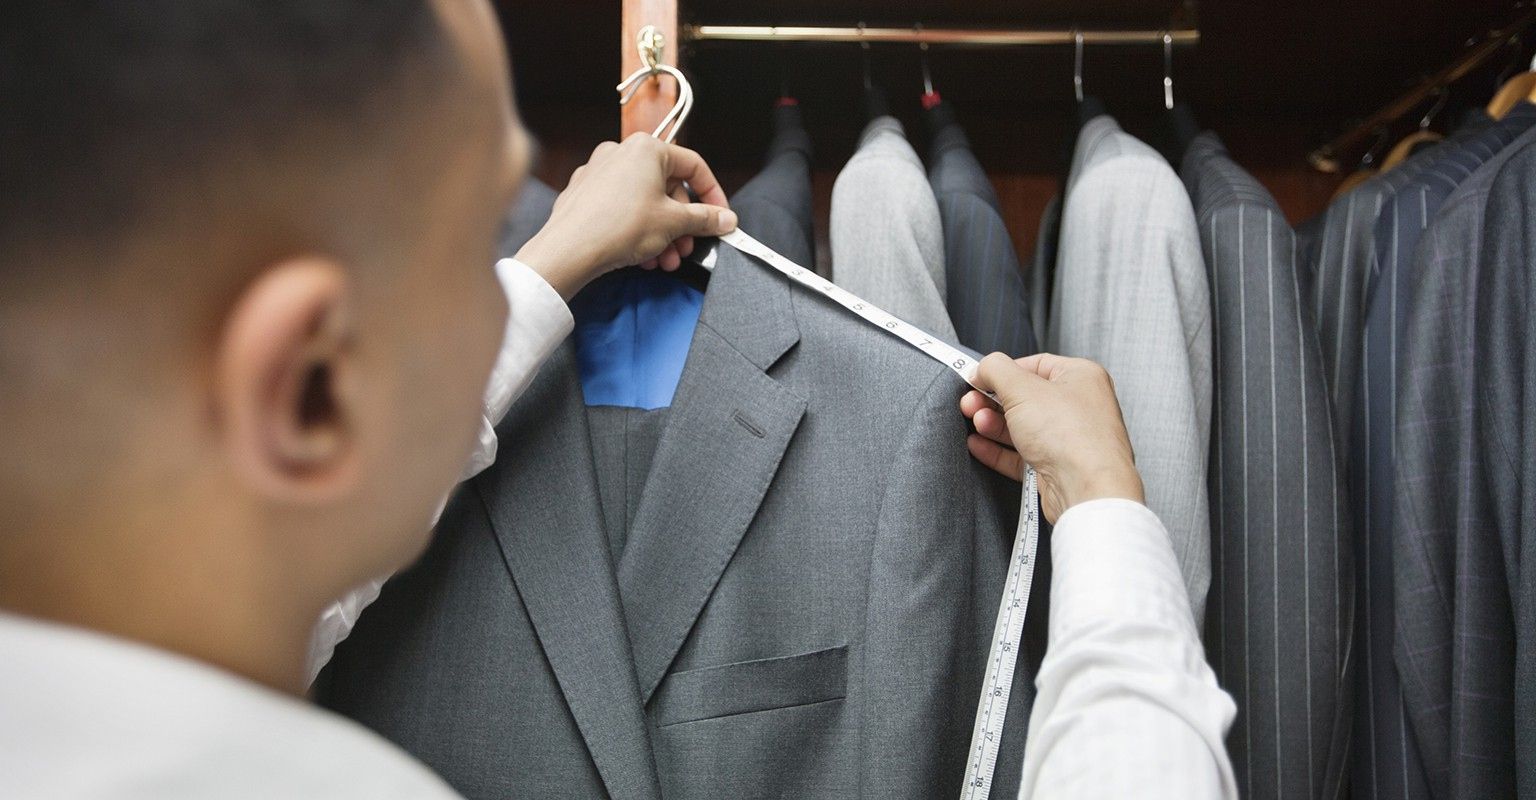 The 10 Best Suit Tailors Near Me (with Free Estimates)